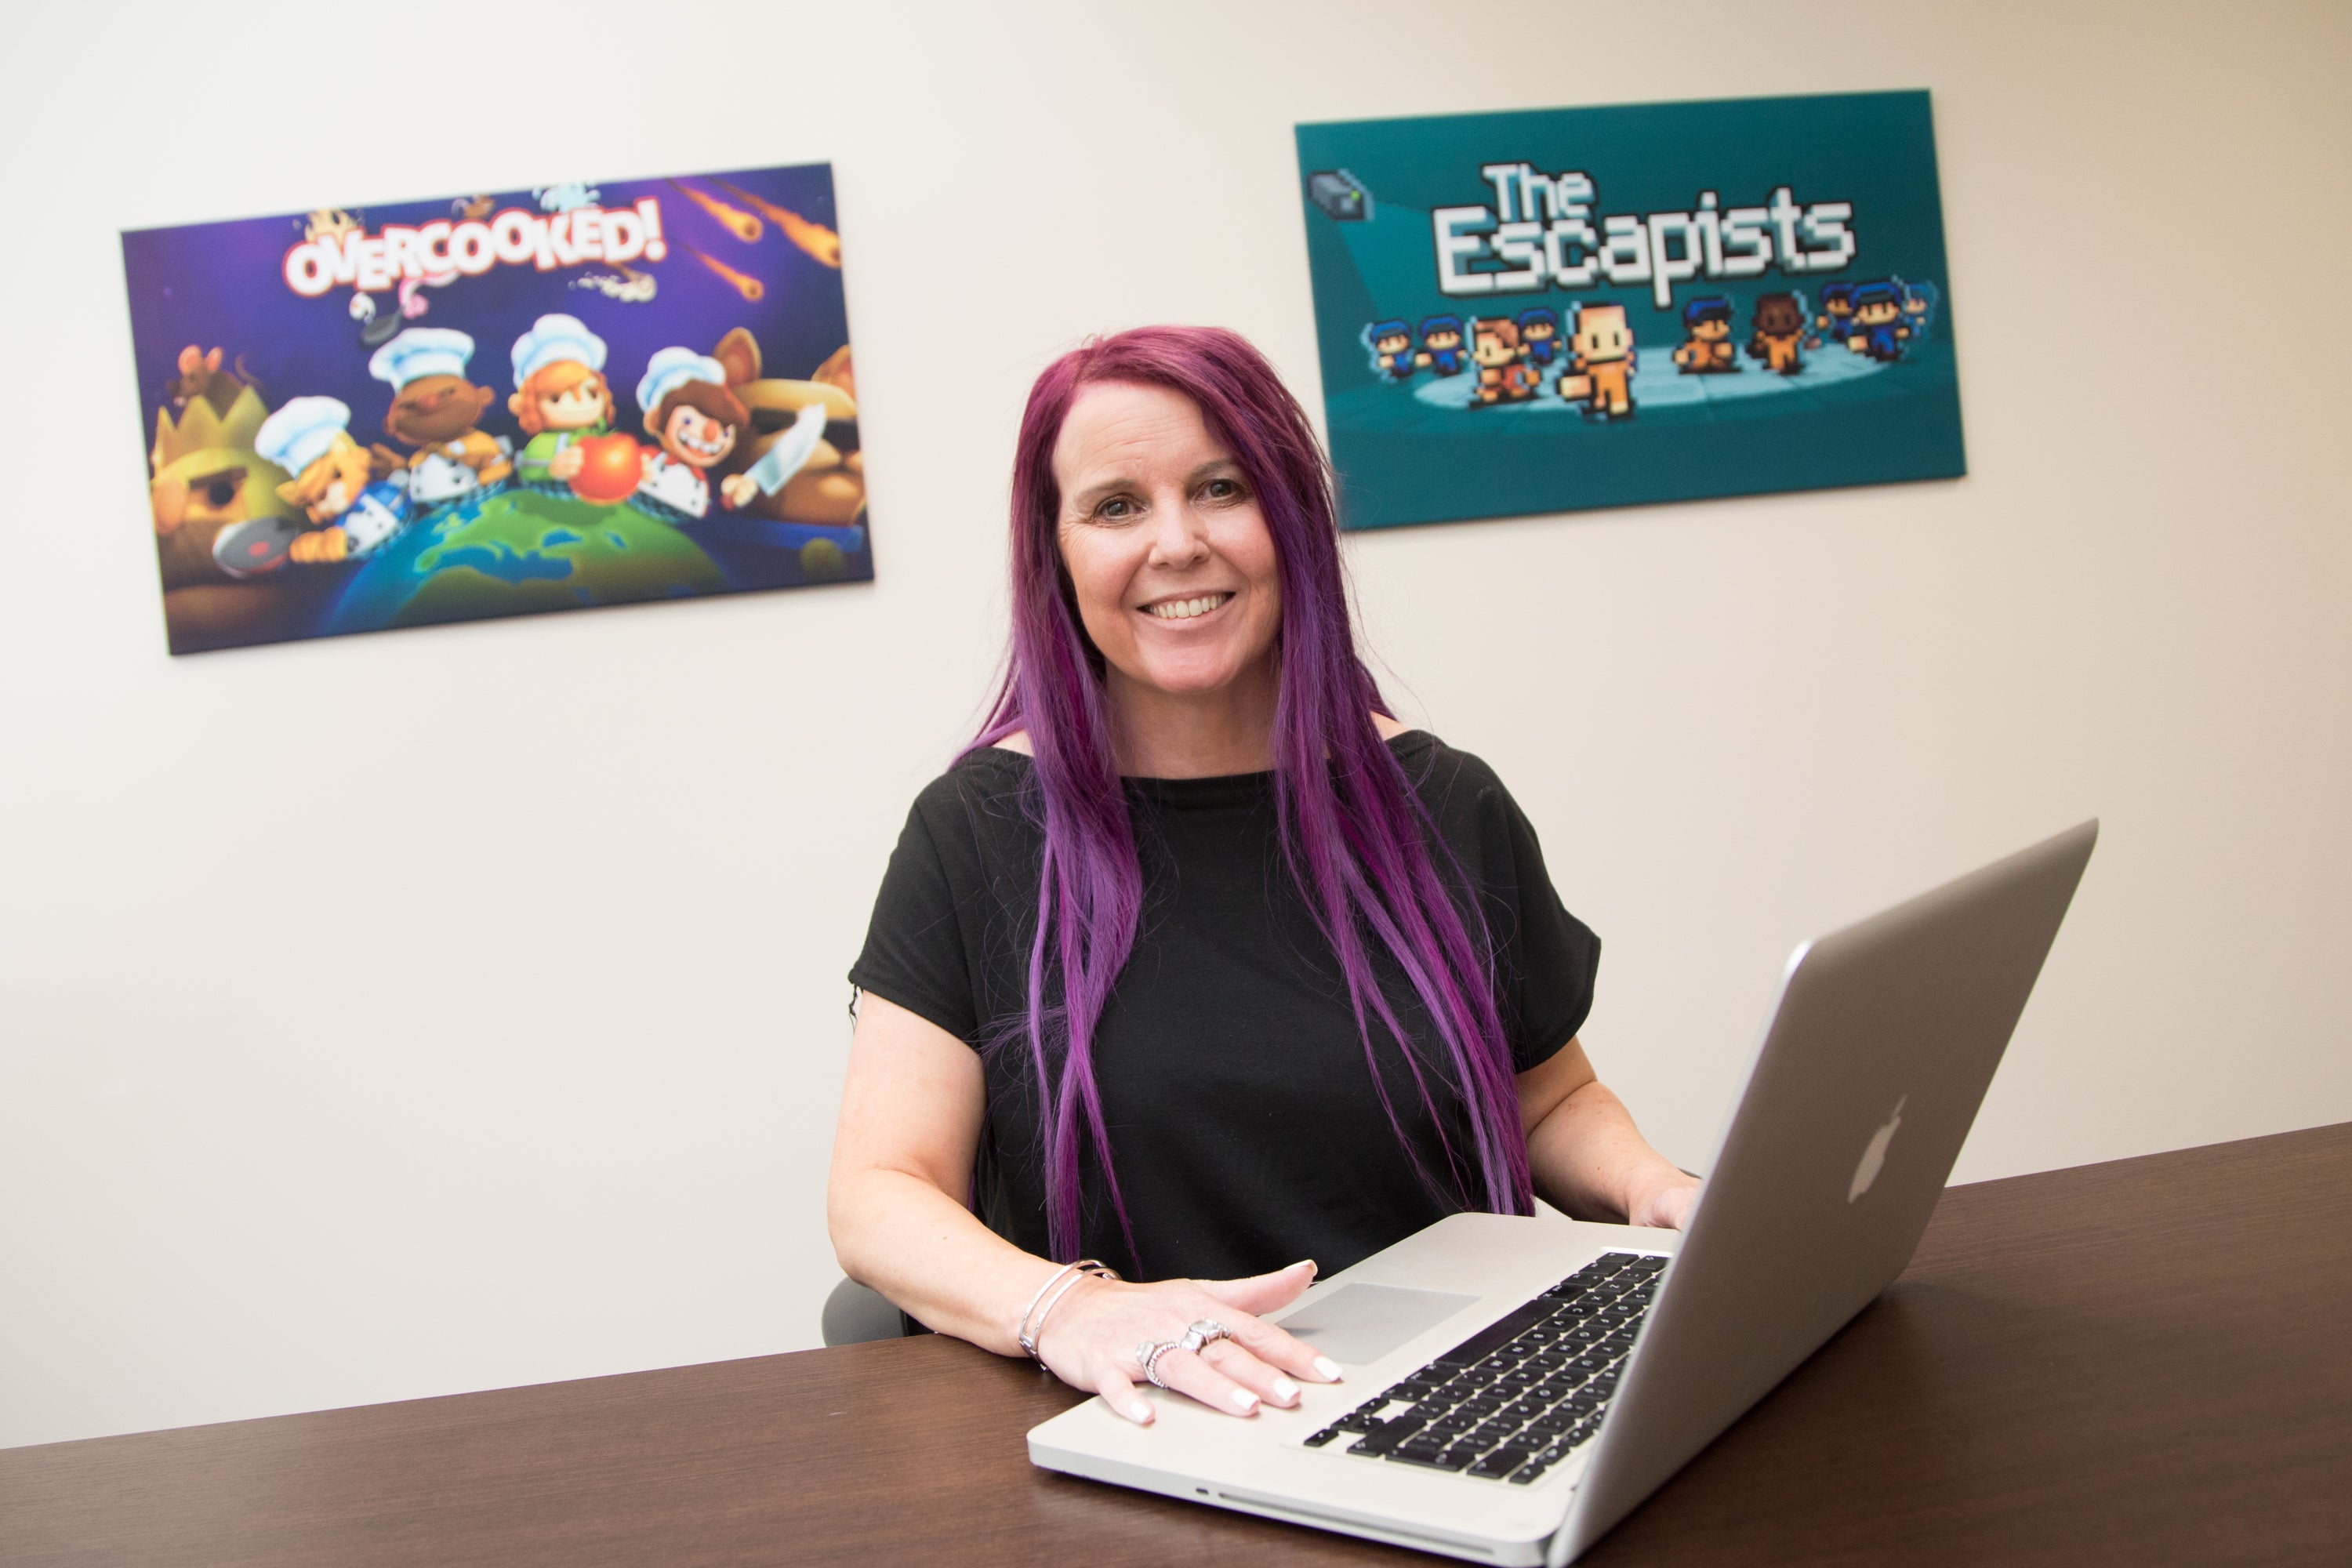 Image for Team17 CEO Debbie Bestwick to step down